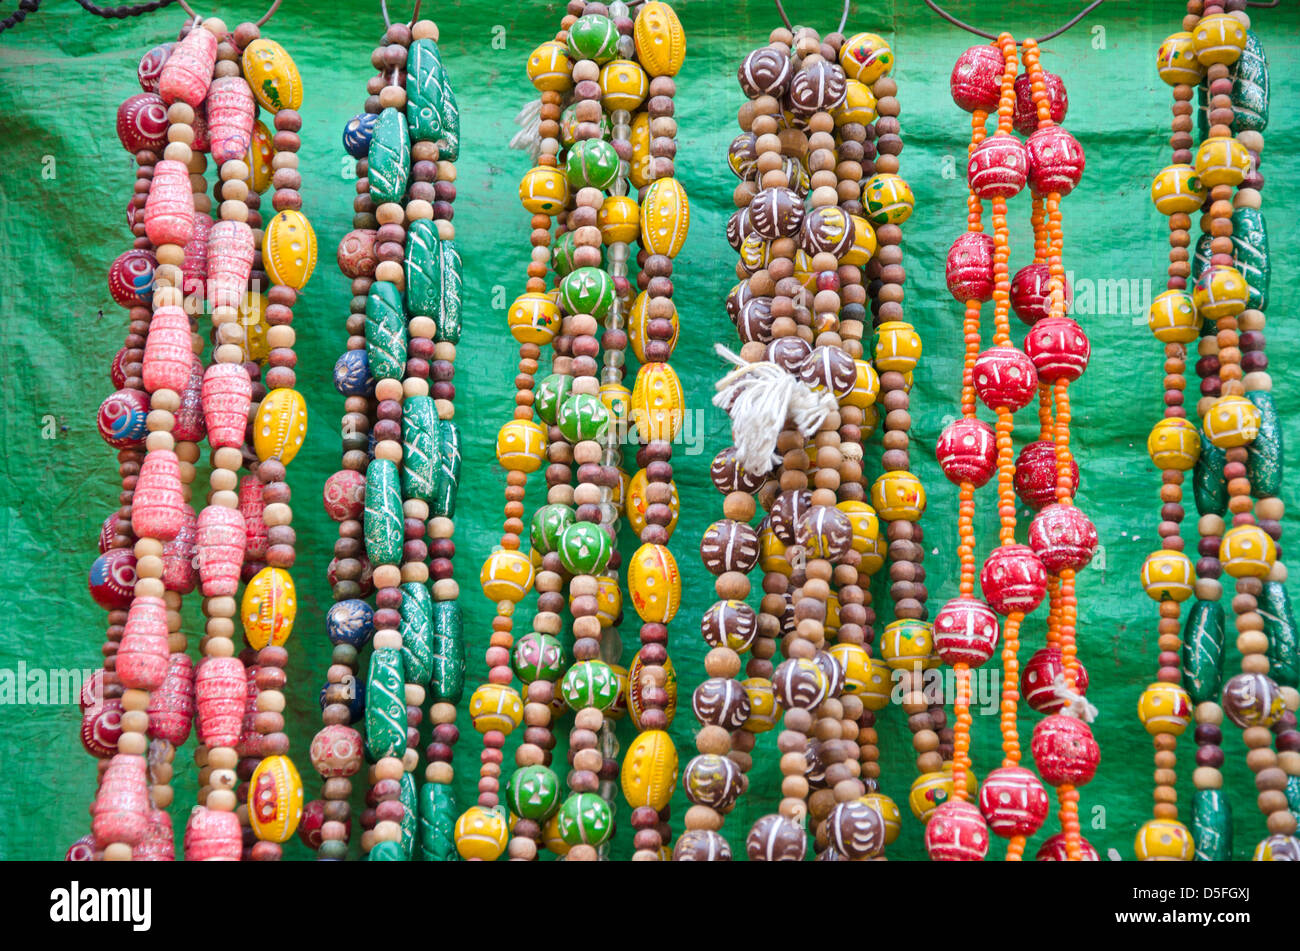 various colorful jewelry in India street market Stock Photo